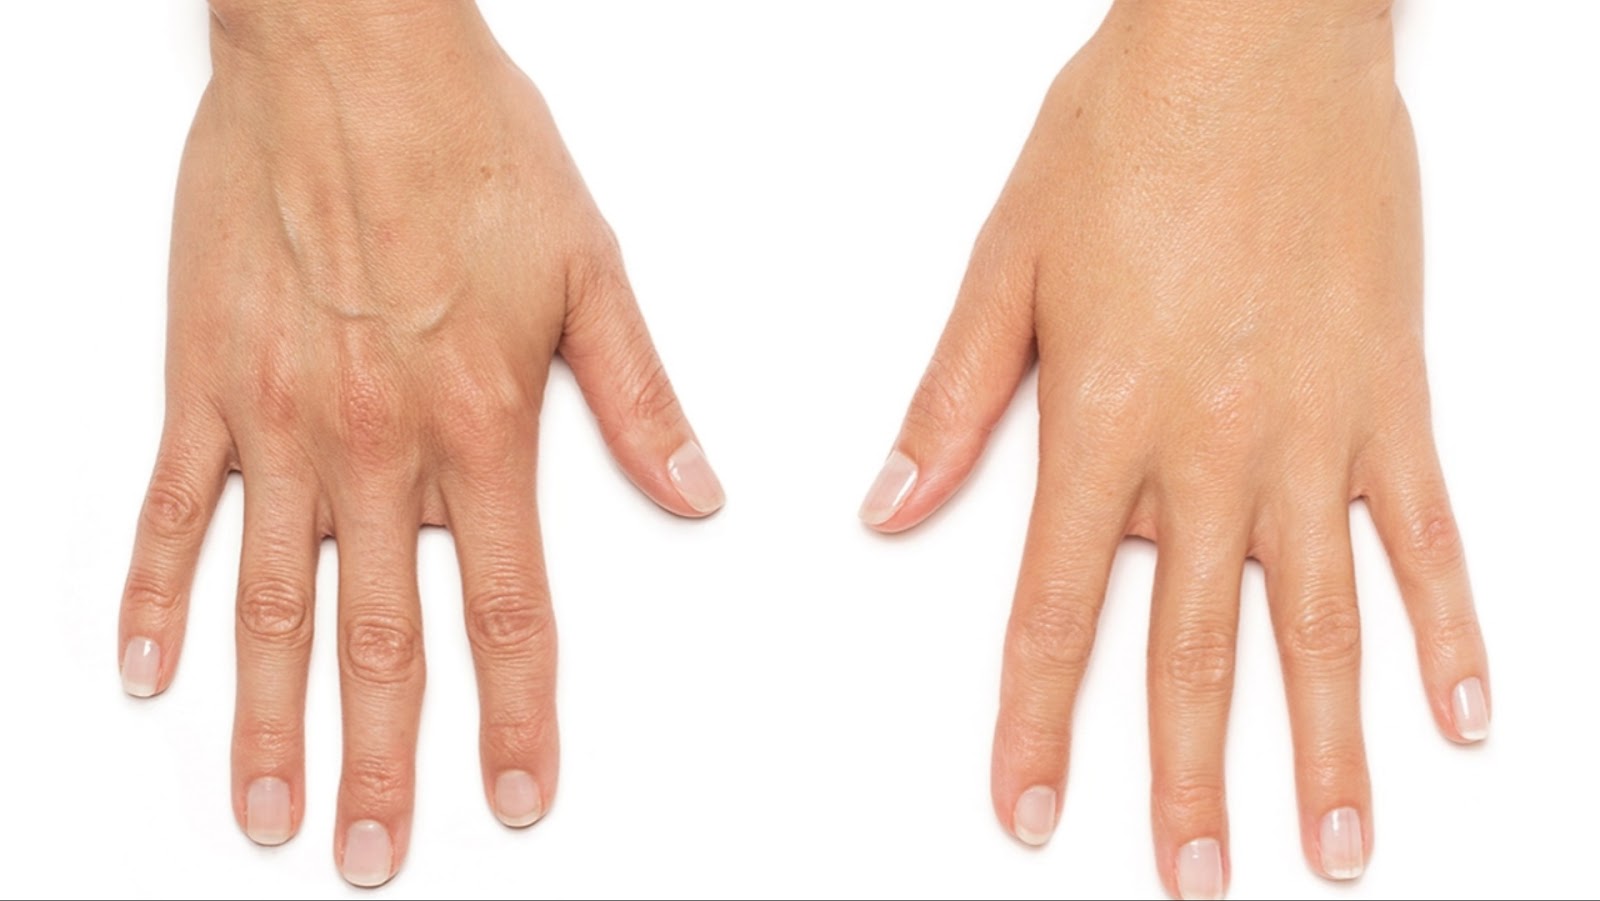 The difference between hands before and after using Radiesse.